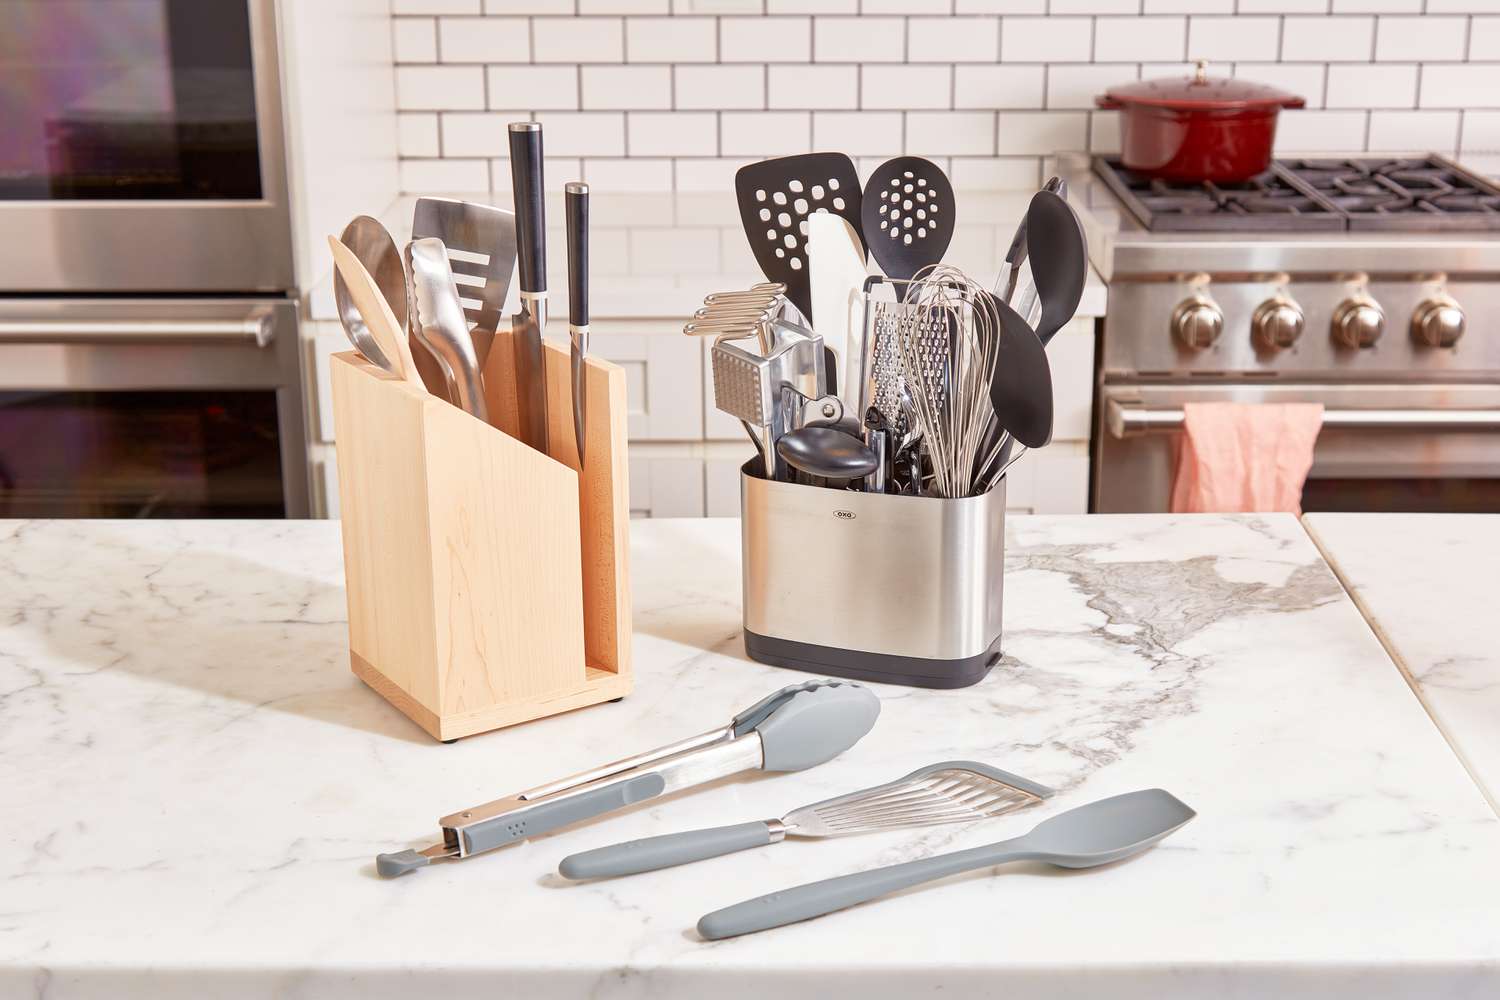 Review: Top Kitchen Gadget Set for Effortless Cooking